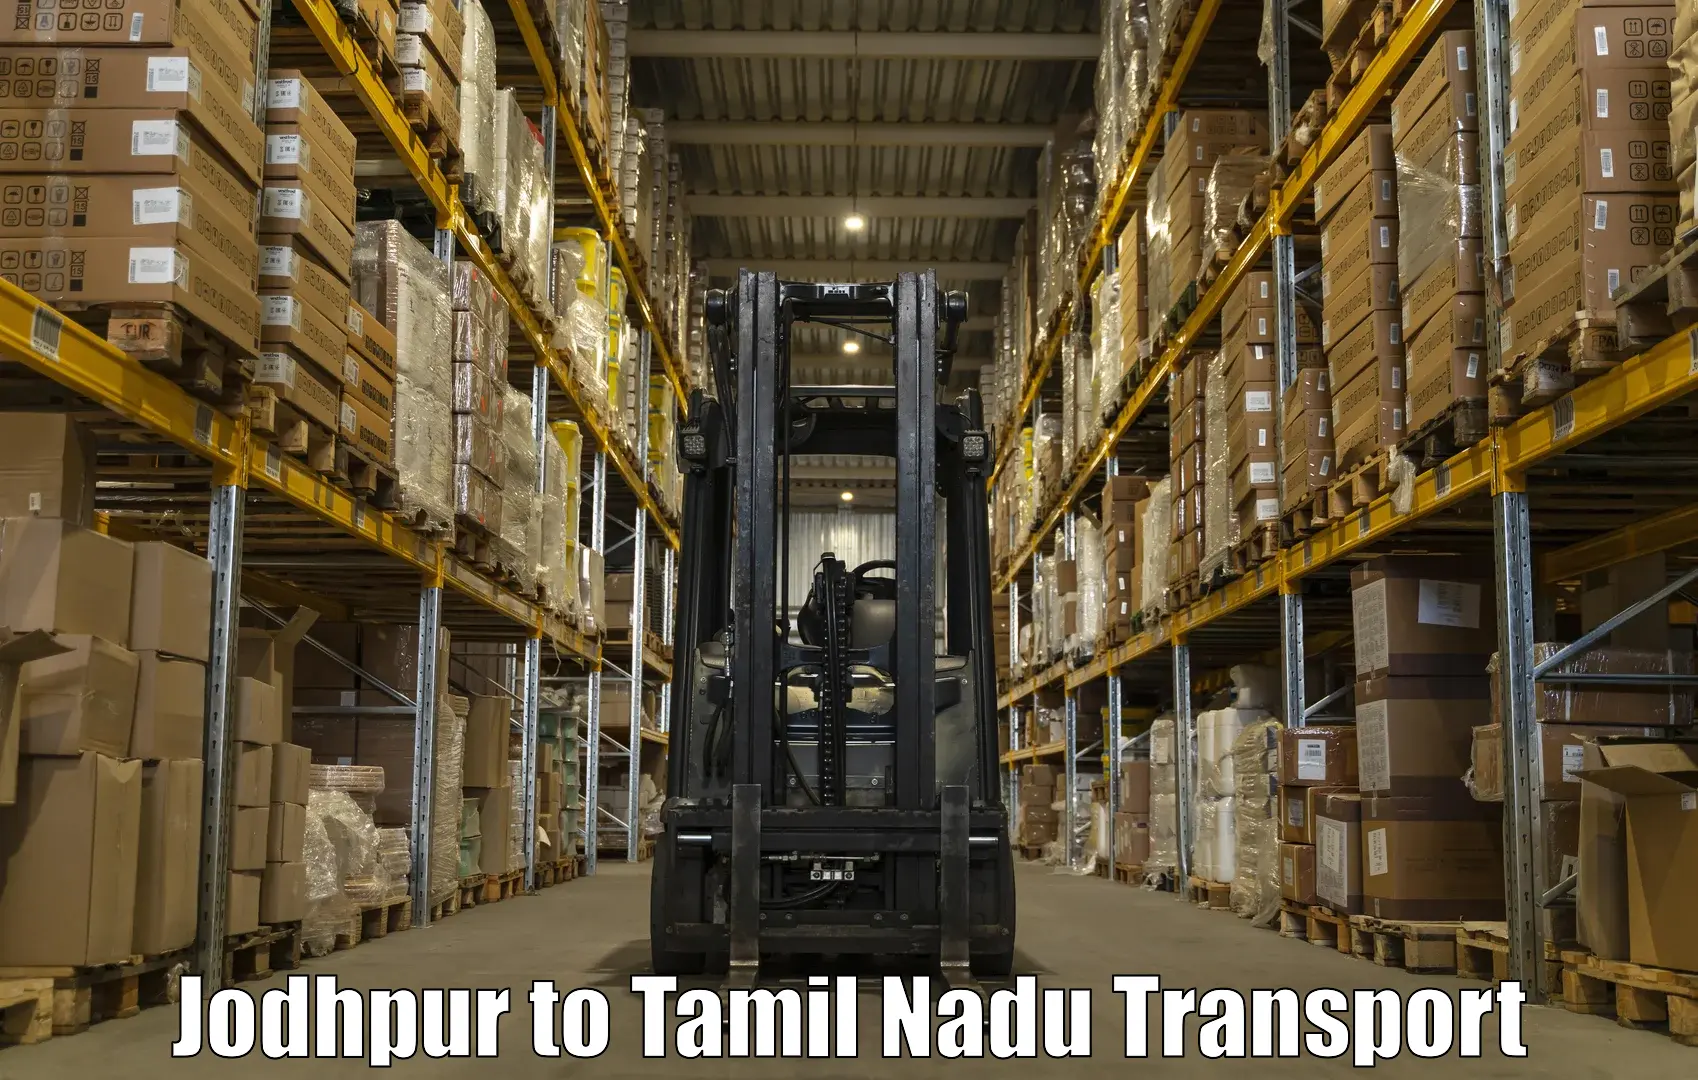 Express transport services in Jodhpur to Ennore Port Chennai